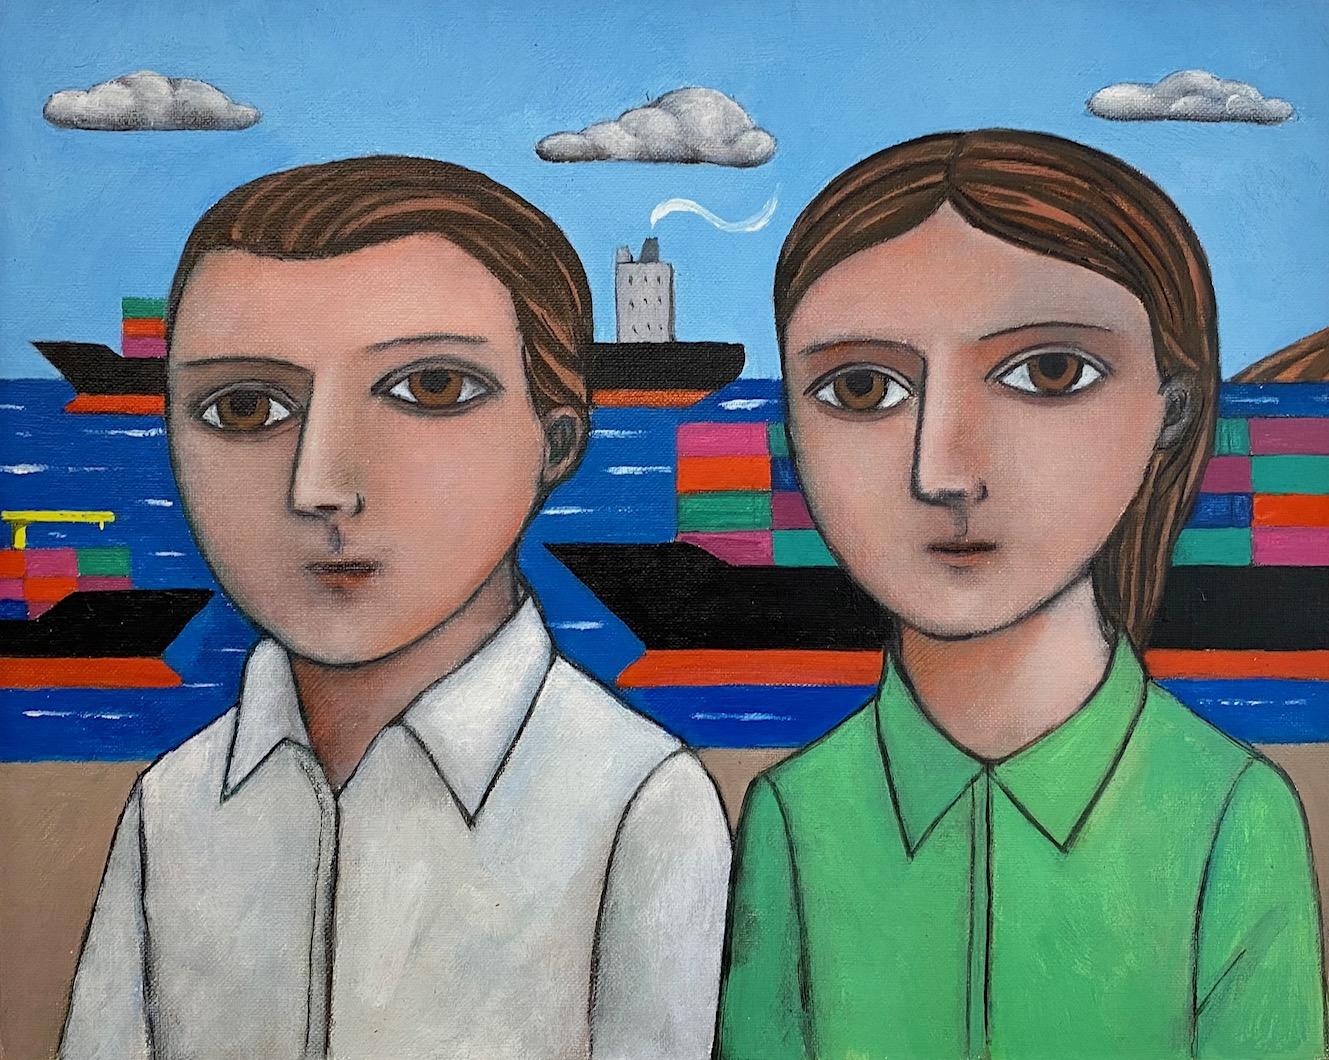 Giacomo Piussi Portrait Painting - Couple With Cargo Ships, Florence, Italy, 2020